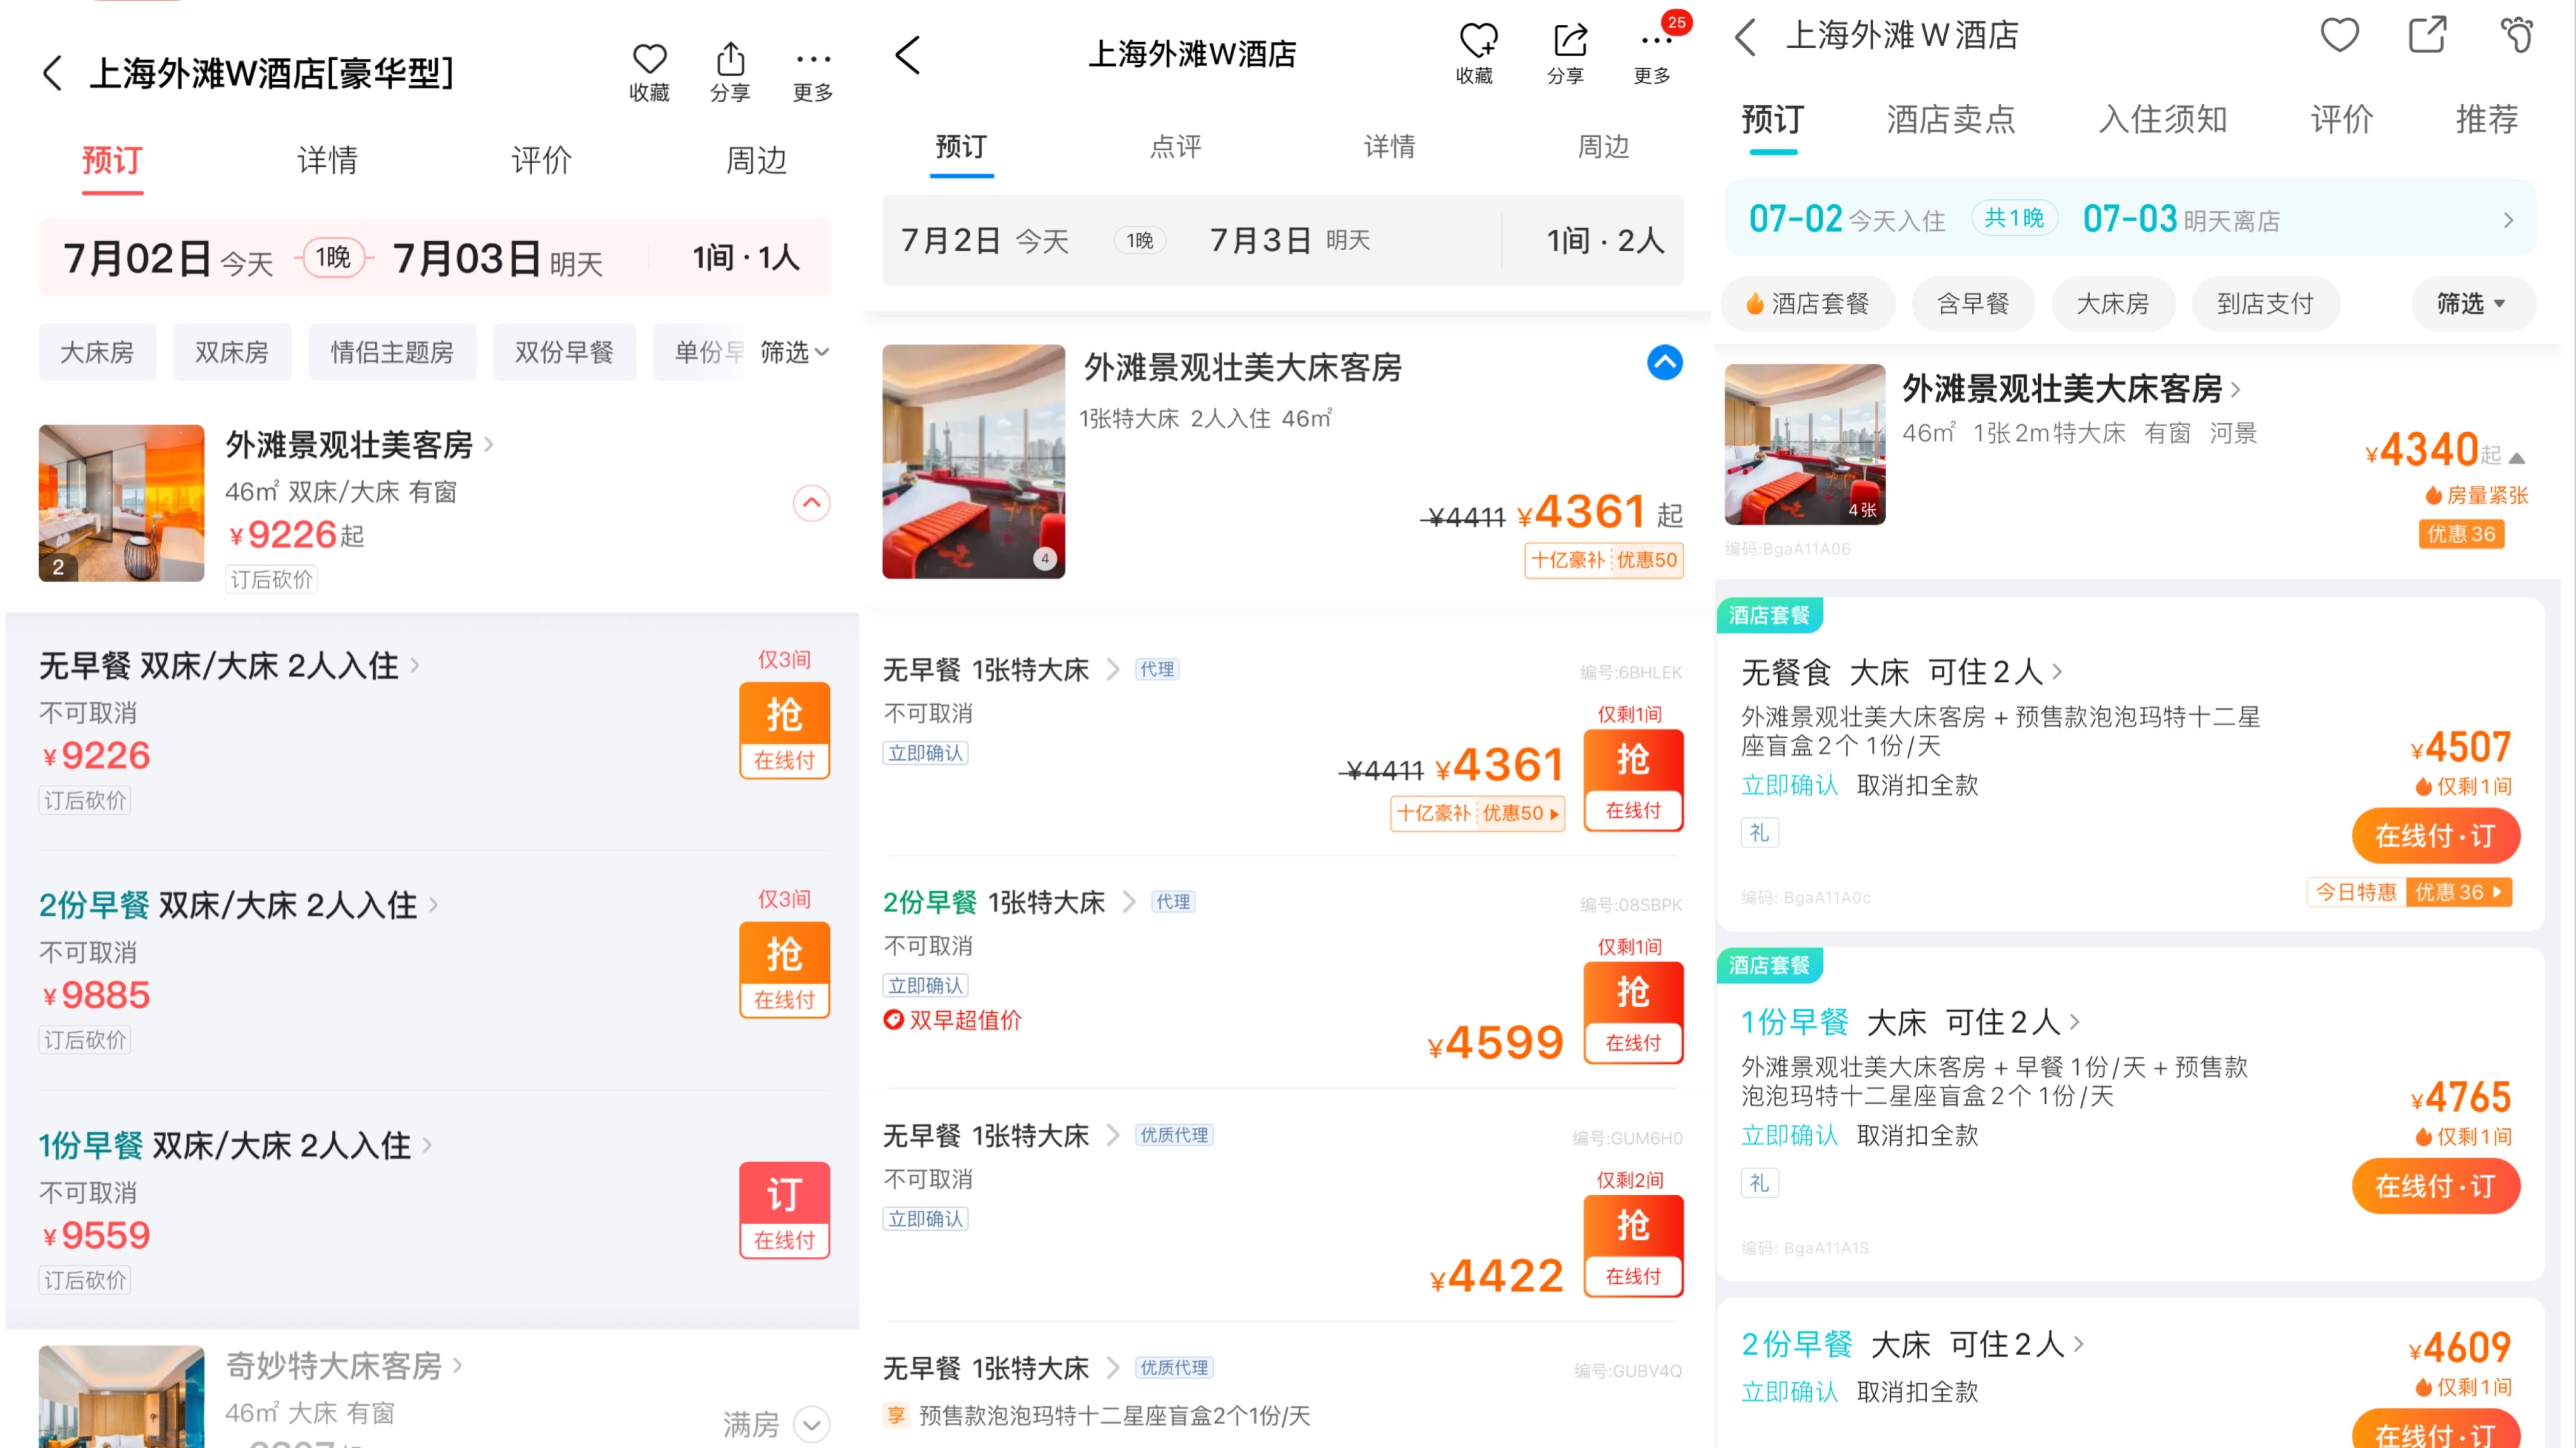 Screenshots of the booking prices for rooms with magnificent views of the Bund at W Hotel on the Bund in Shanghai displayed on the morning of July 2nd, from left to right: Meituan, Ctrip, Where to Go.